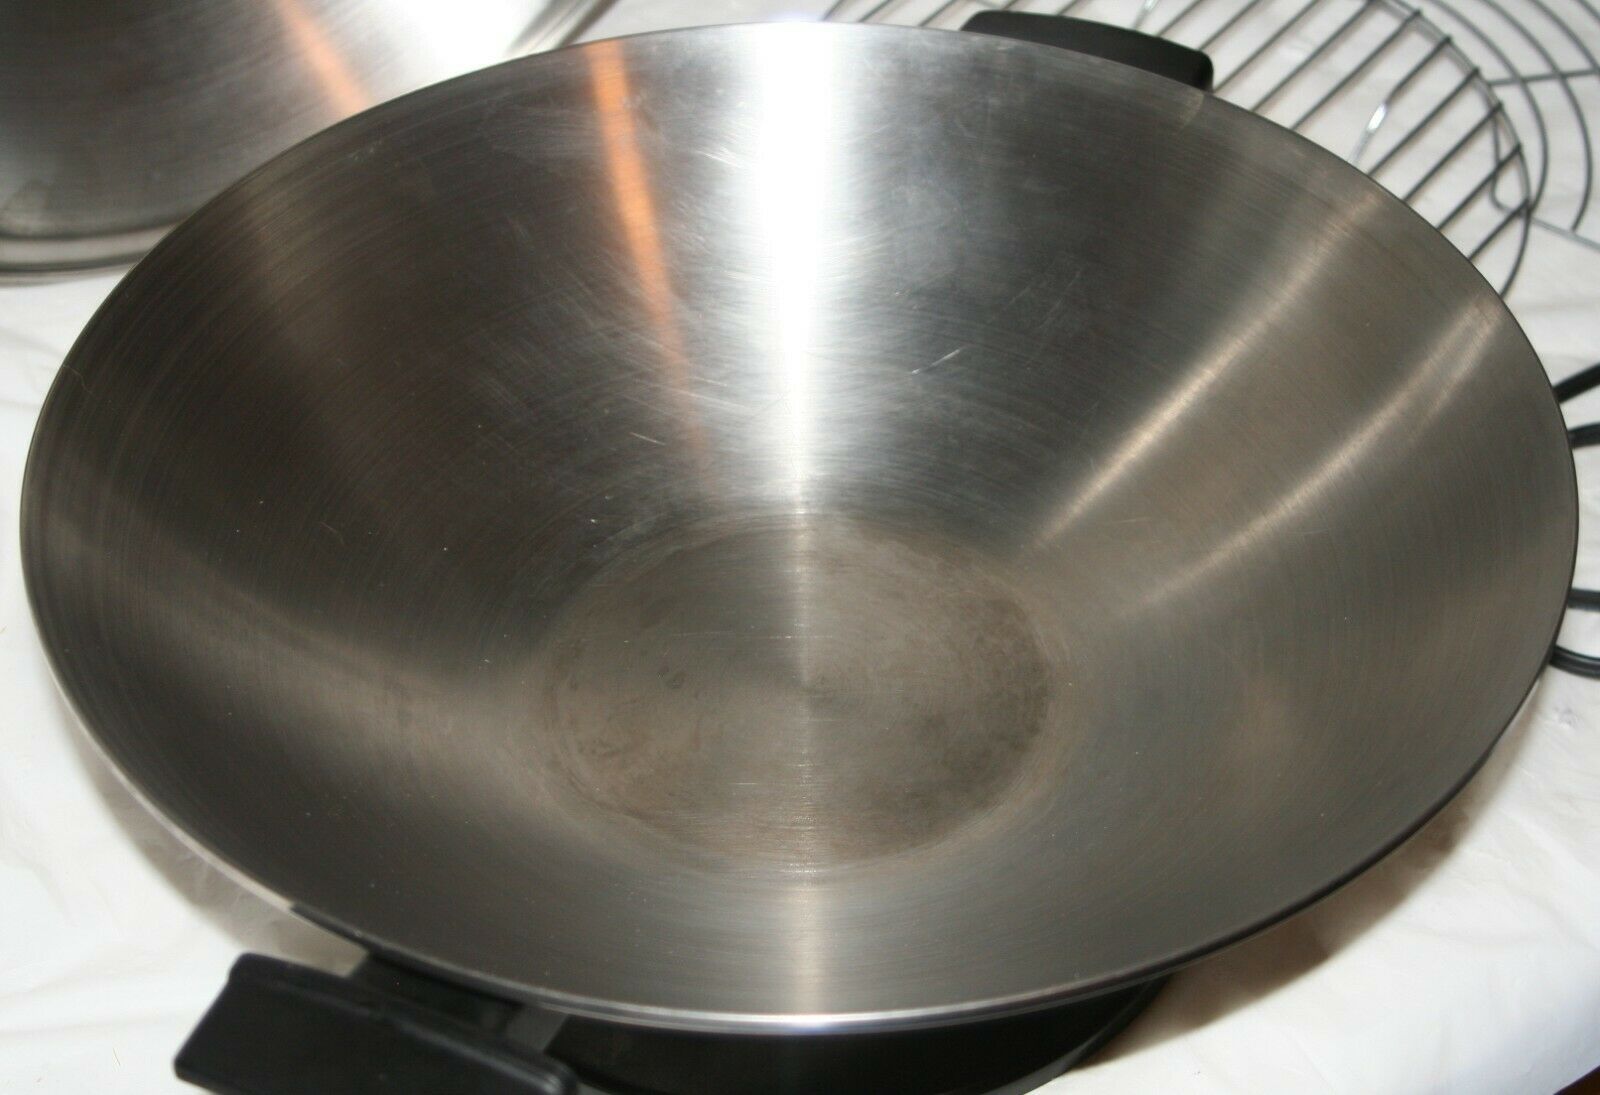 Cazo Grande Para Carnitas Extra Large 19 inch Stainless Steel